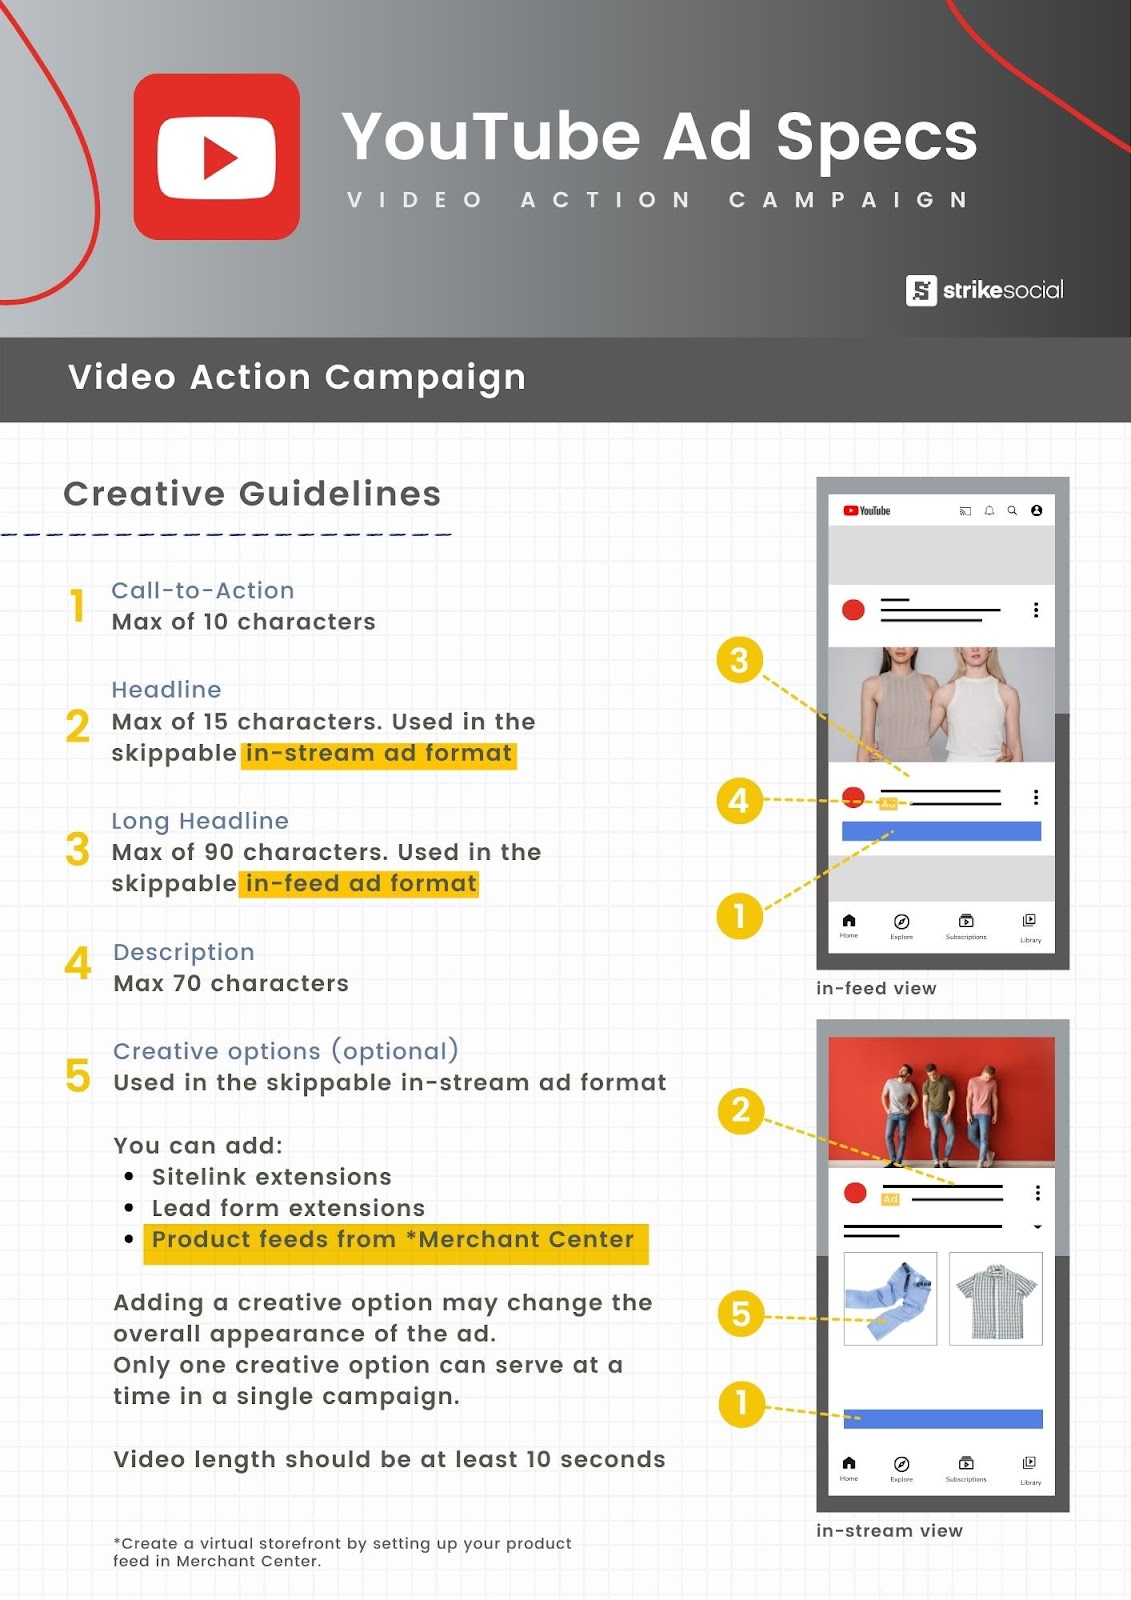 Youtube Ad Specs: Video Action Campaign